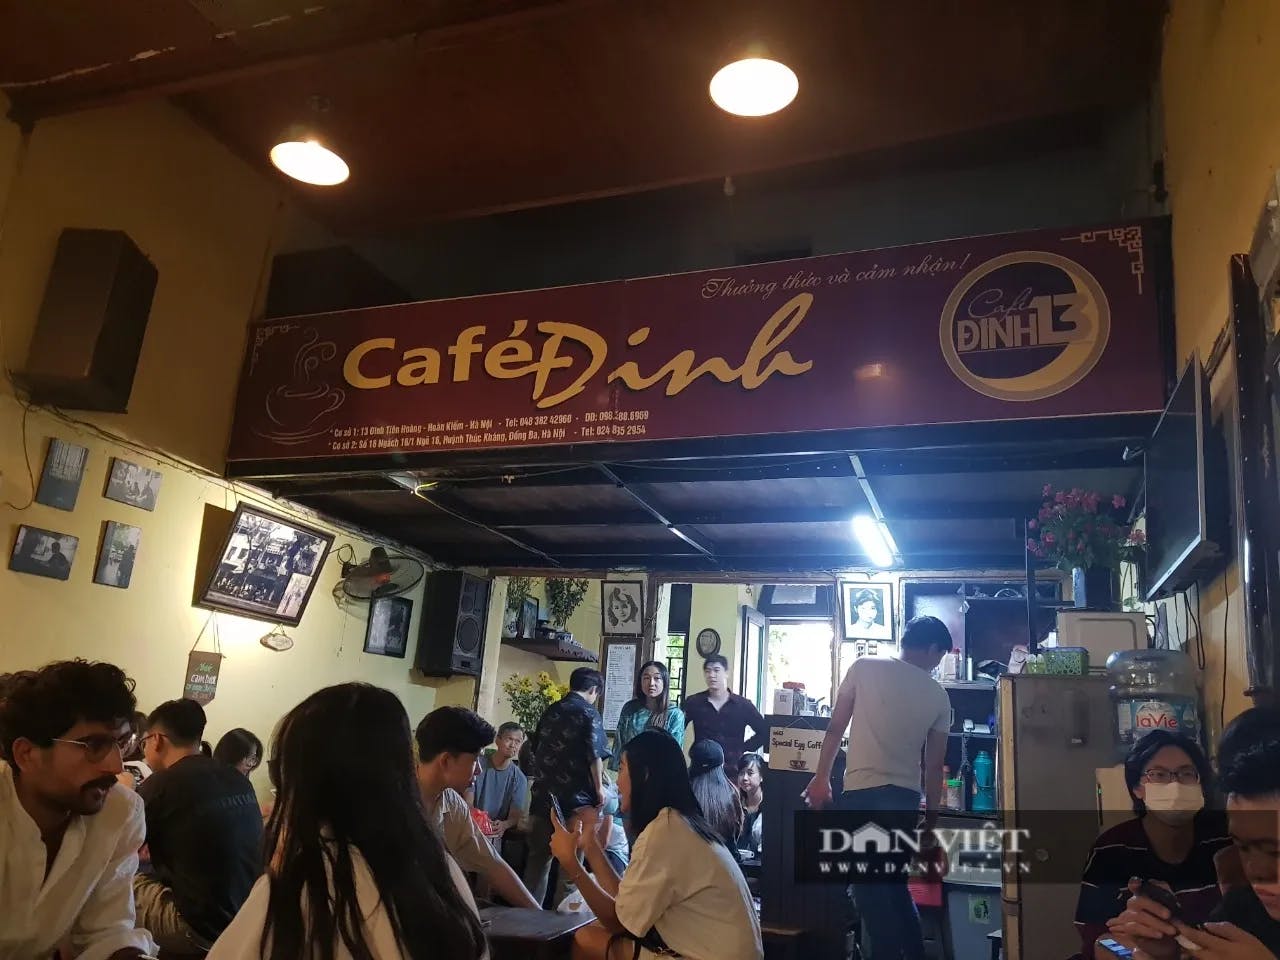 the egg coffee at Dinh Cafe